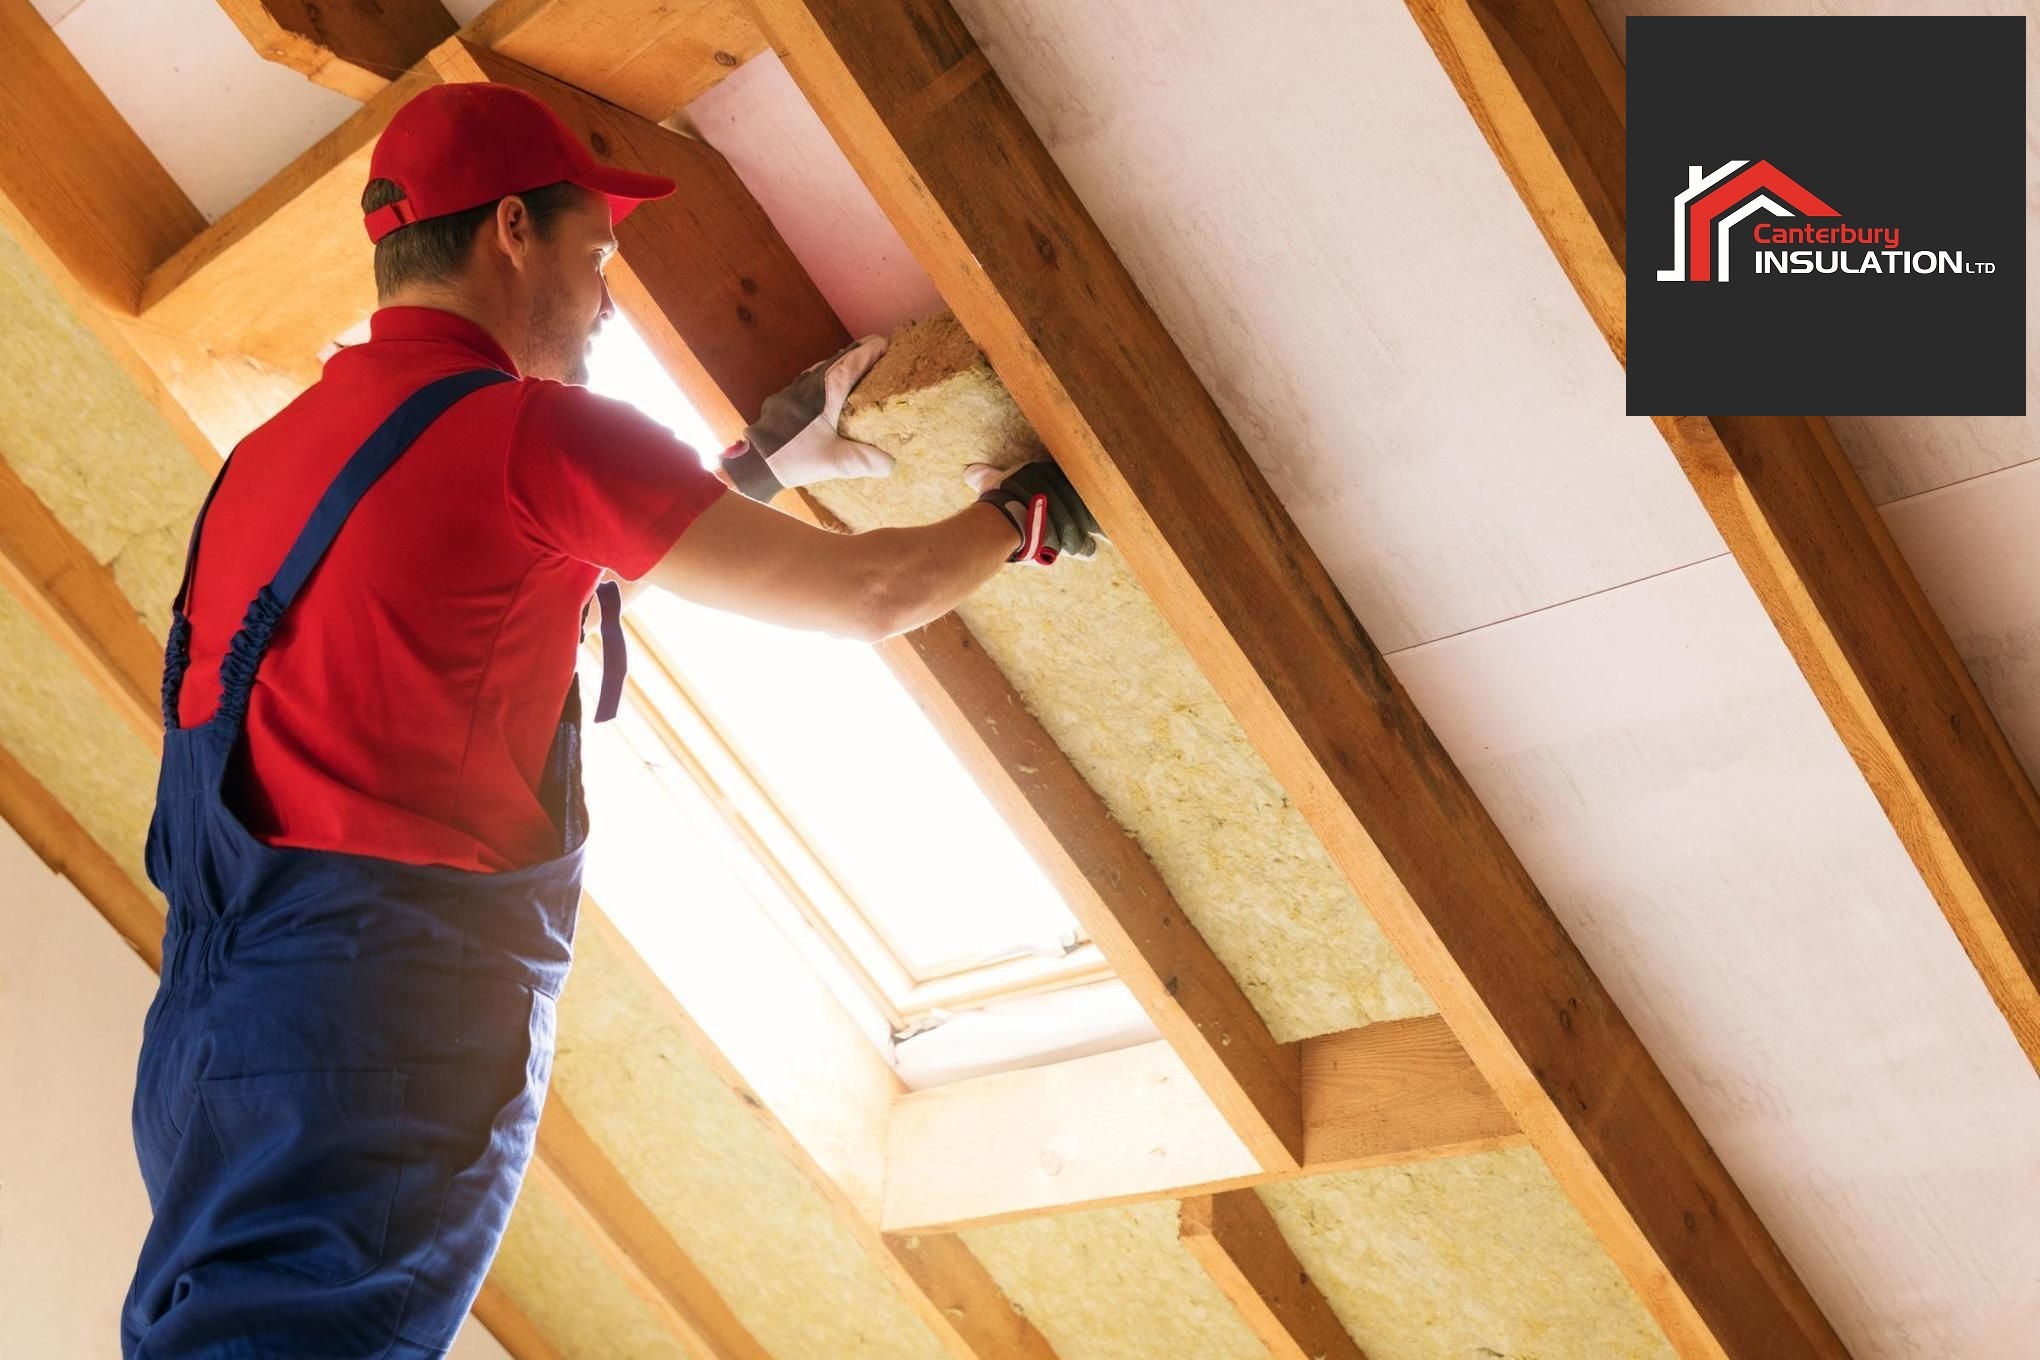 How Ceiling Insulation Can Add Comfort to Your Home